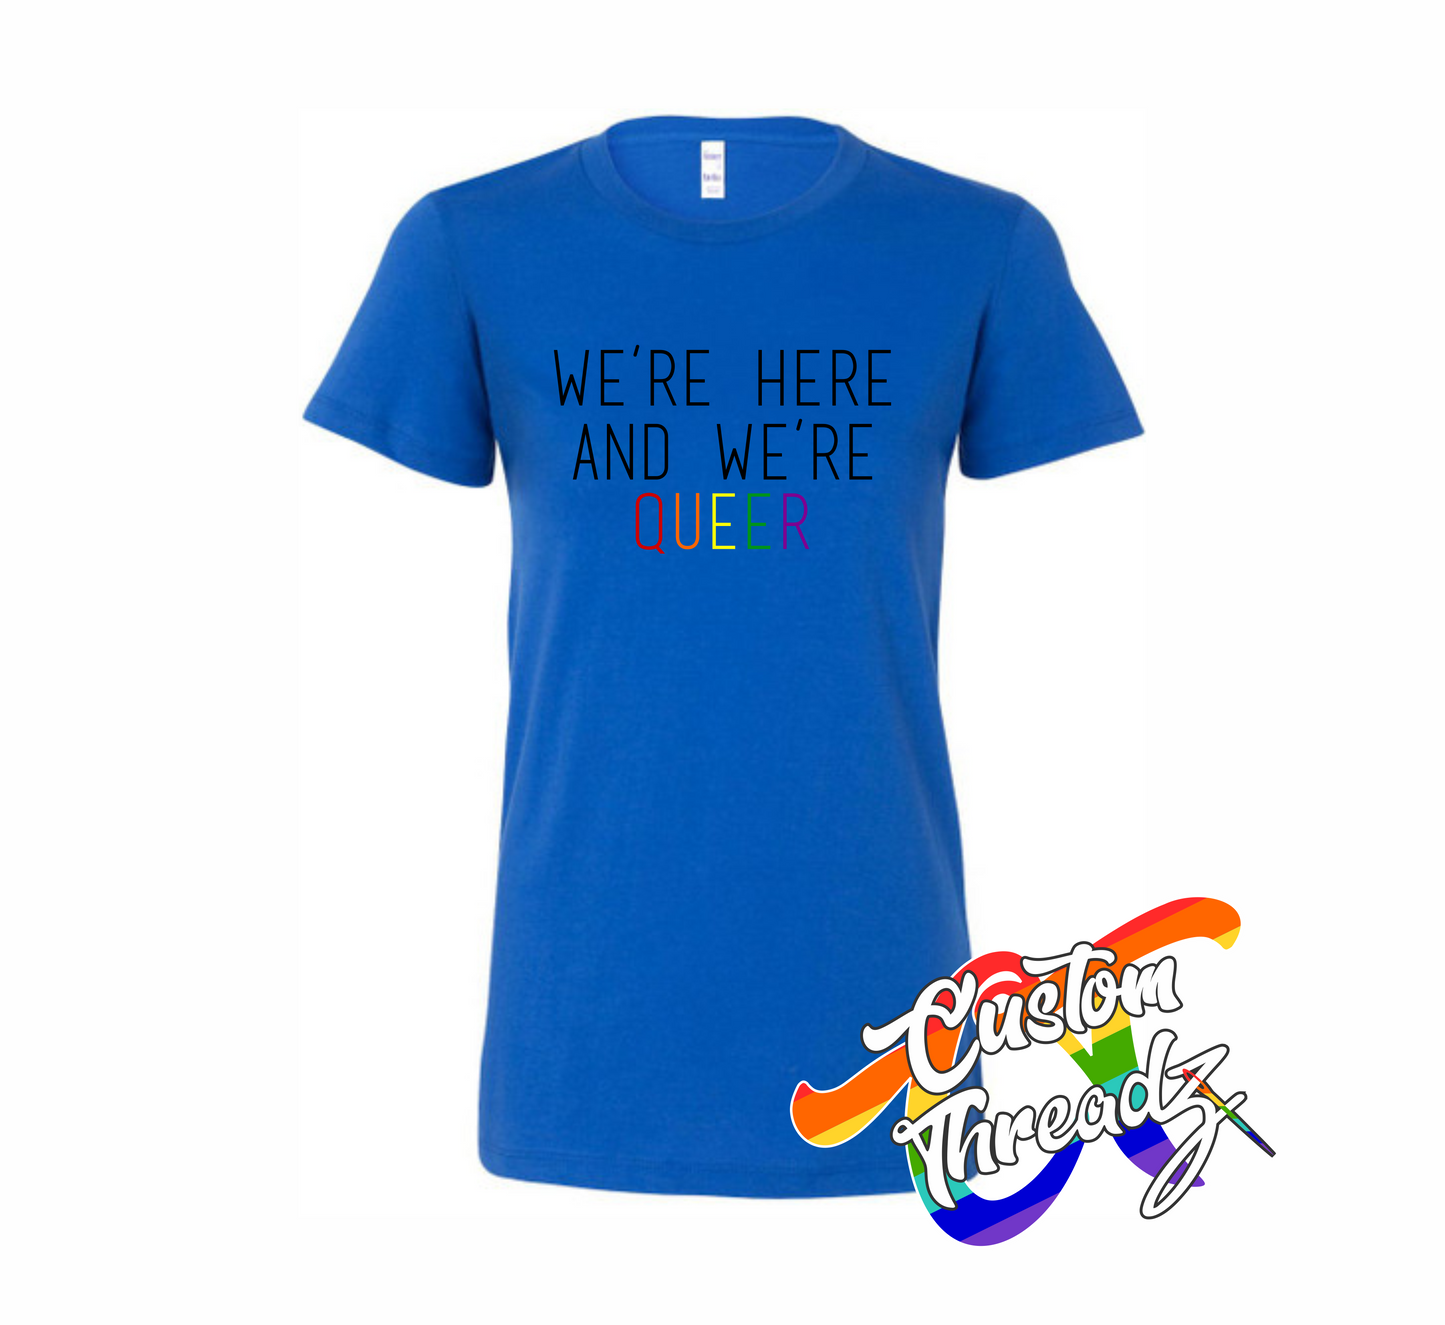 royal blue womens tee with were here were queer rainbow DTG printed design